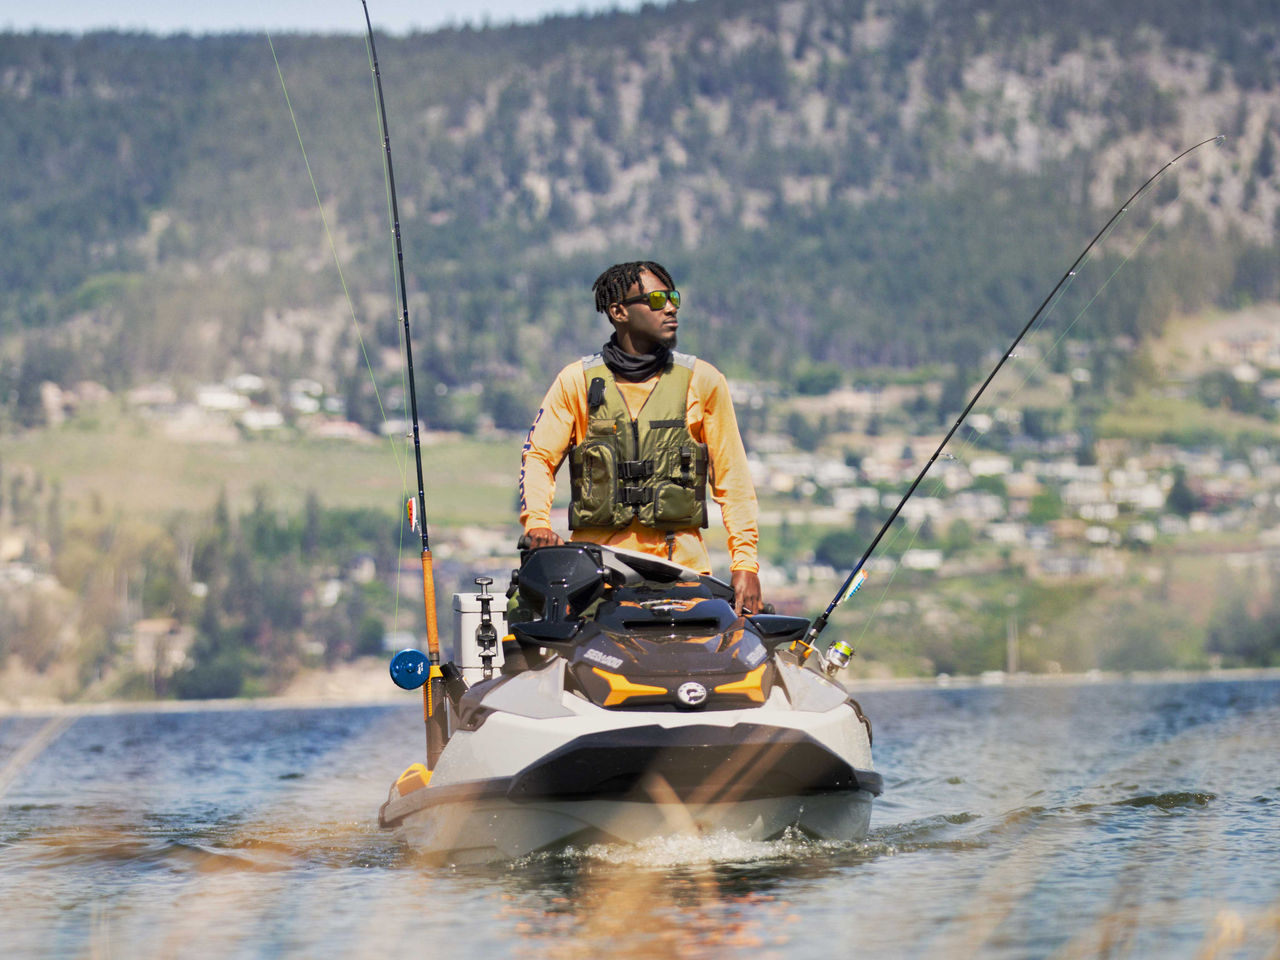 Gearing Up for Fishing with a FishPro watercraft - Sea-Doo